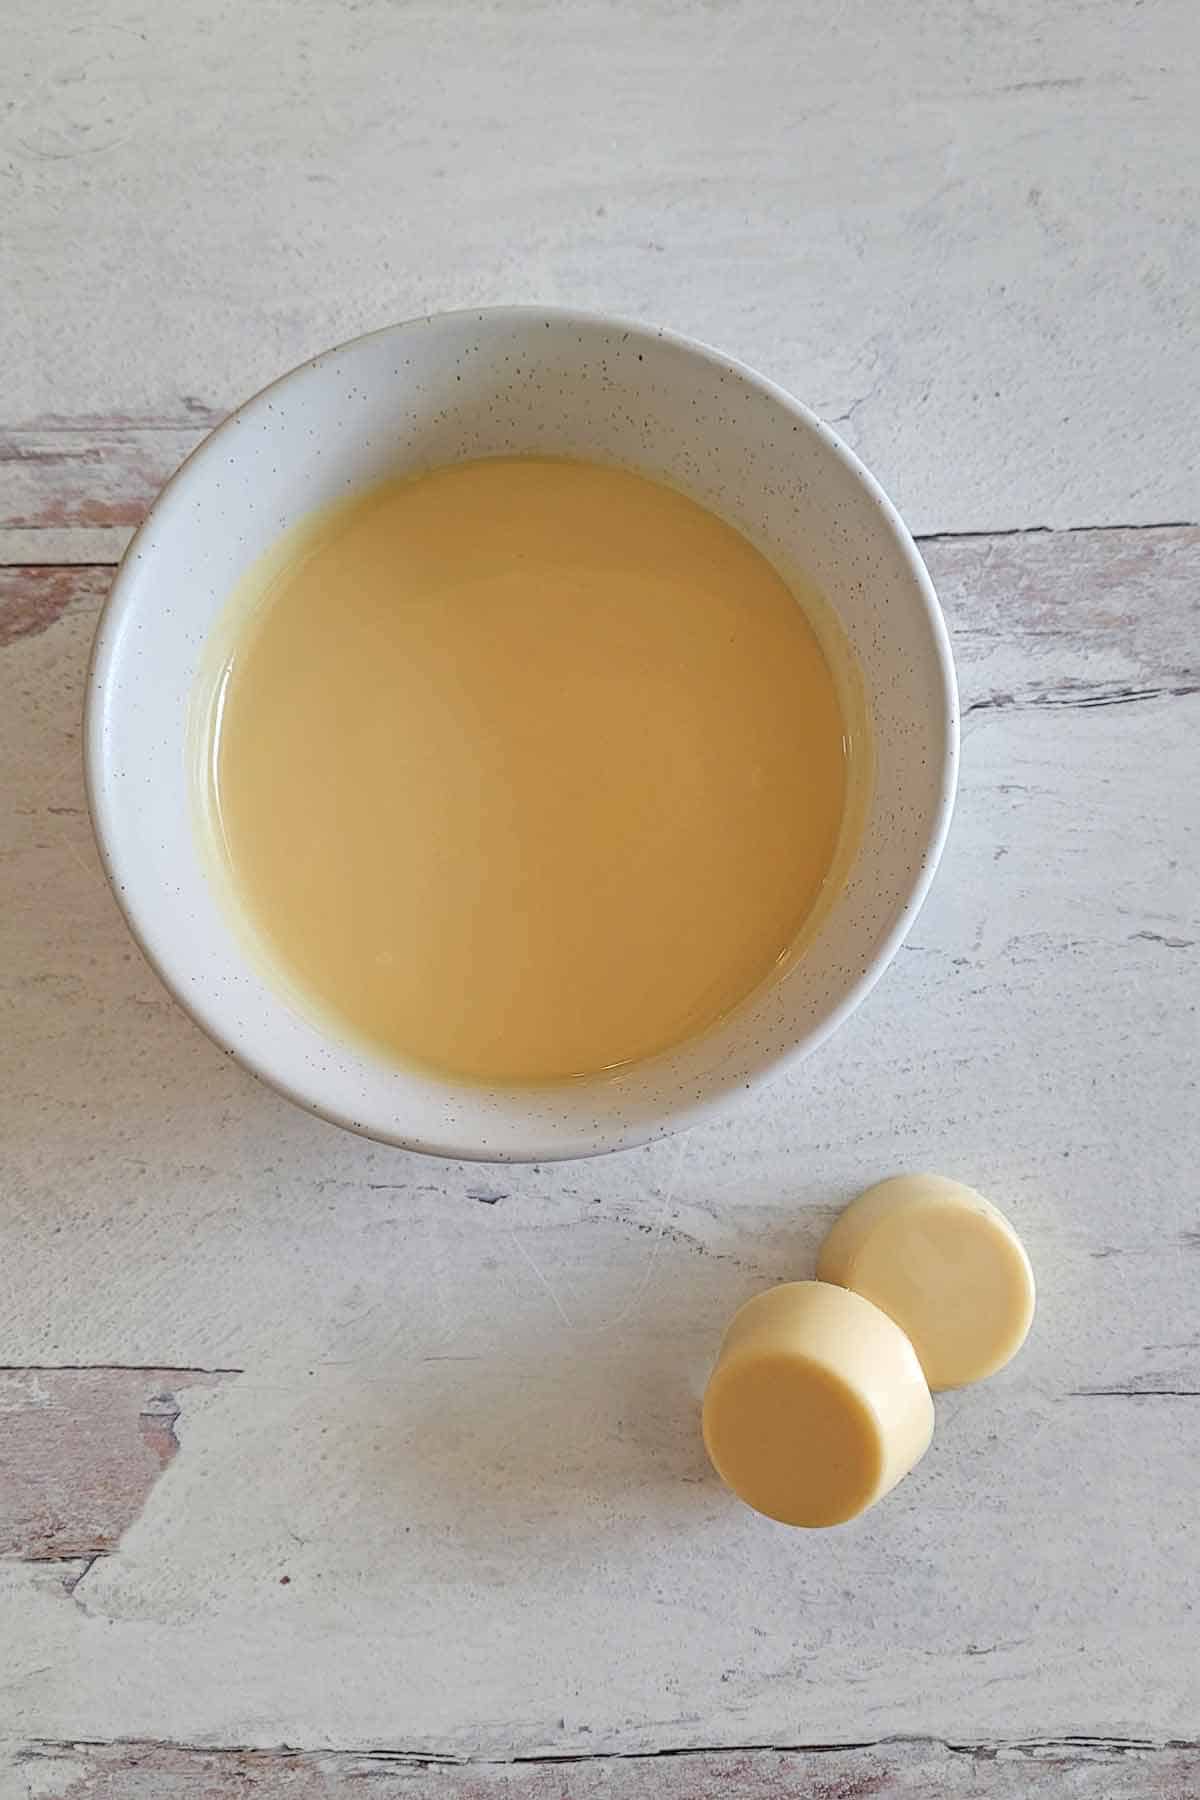 A bowl of homemade white chocolate and two pieces of solid homemade white chocolate.